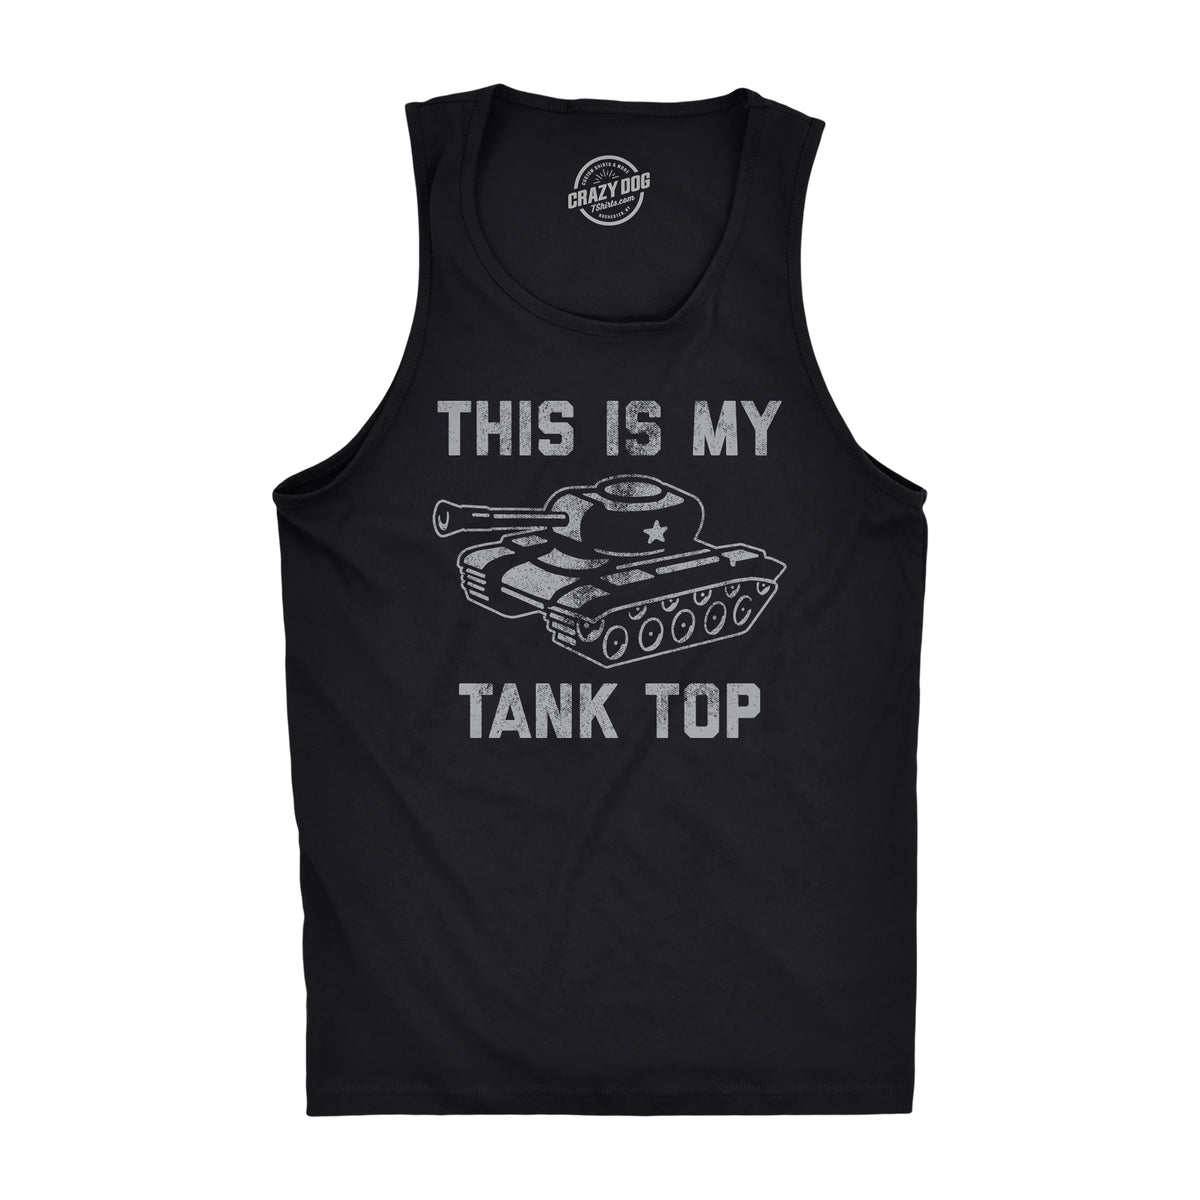 Funny Heather Black - Tank Top This Is My Tank Top Mens Tank Top Nerdy sarcastic Tee